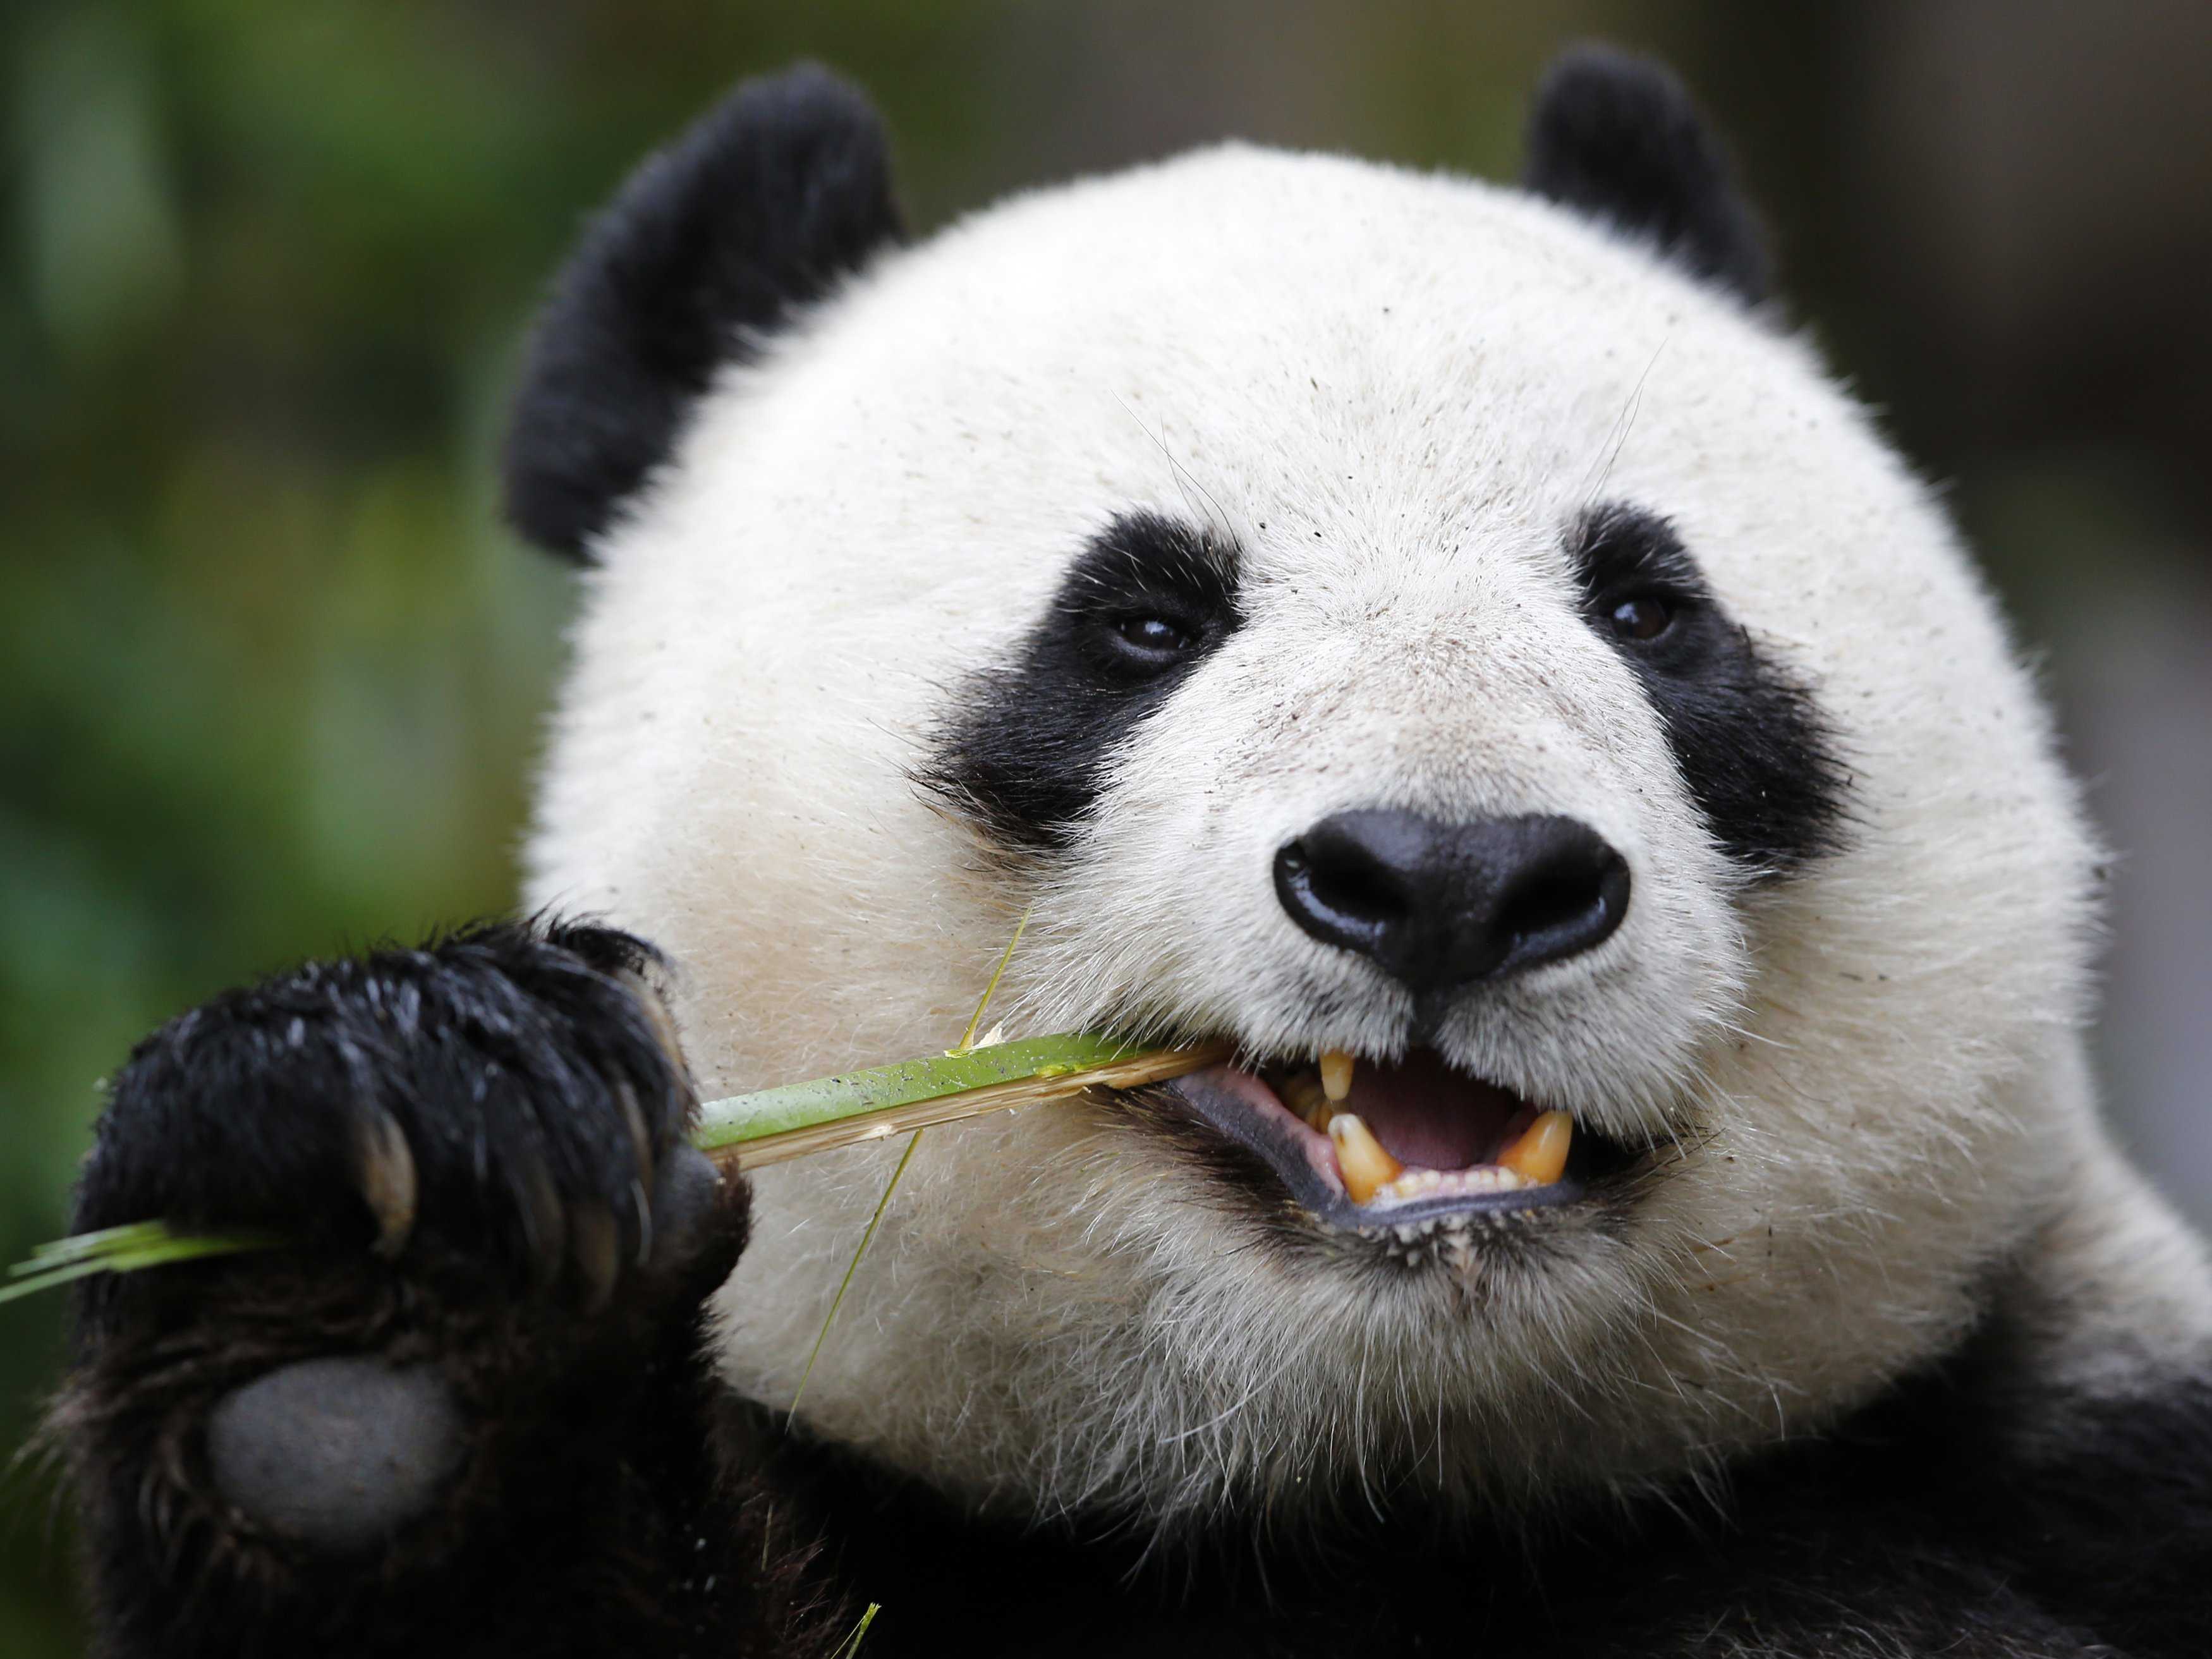 chinas-panda-diplomacy-has-entered-a-lucrative-new-phase